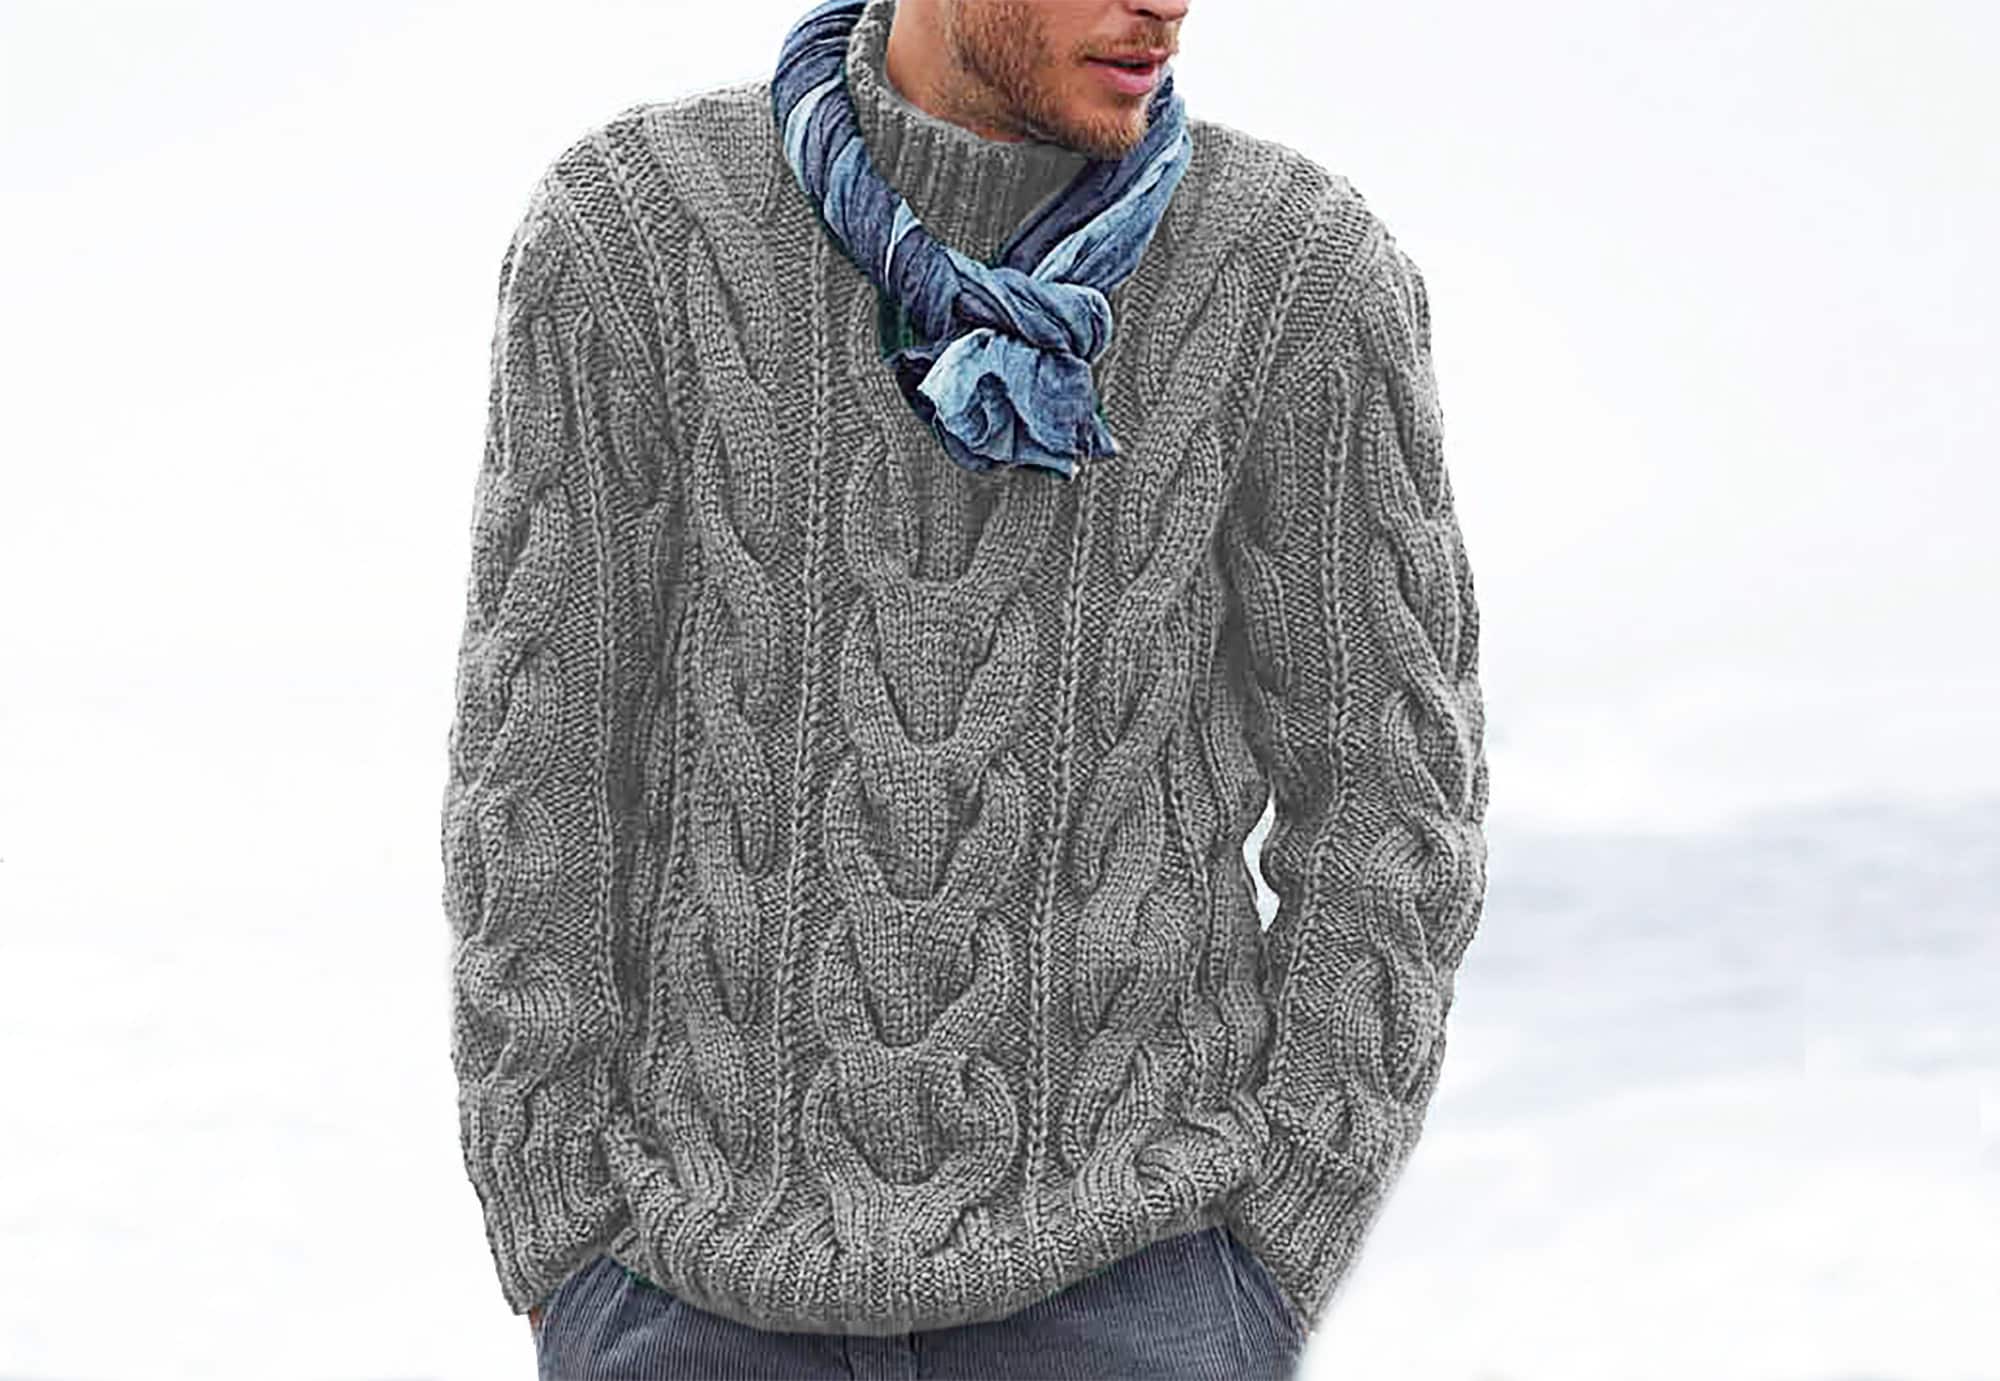 Mens Cable Knit Sweater Patterns 